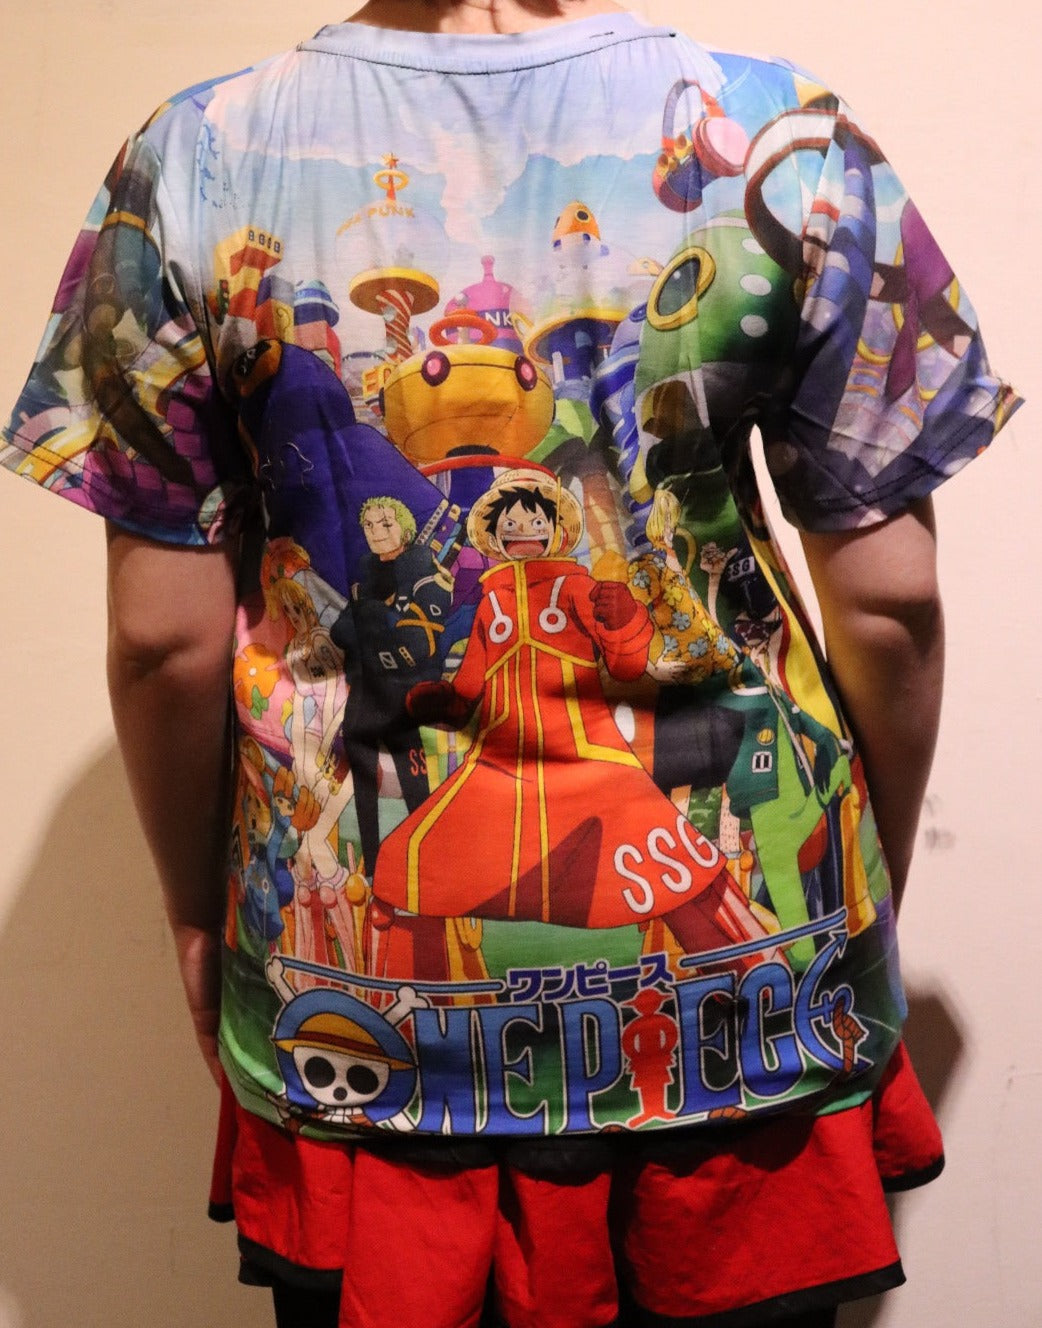 One Piece - Egghead Arc TShirt (Price Does Not Include Shipping - Please Read Description)